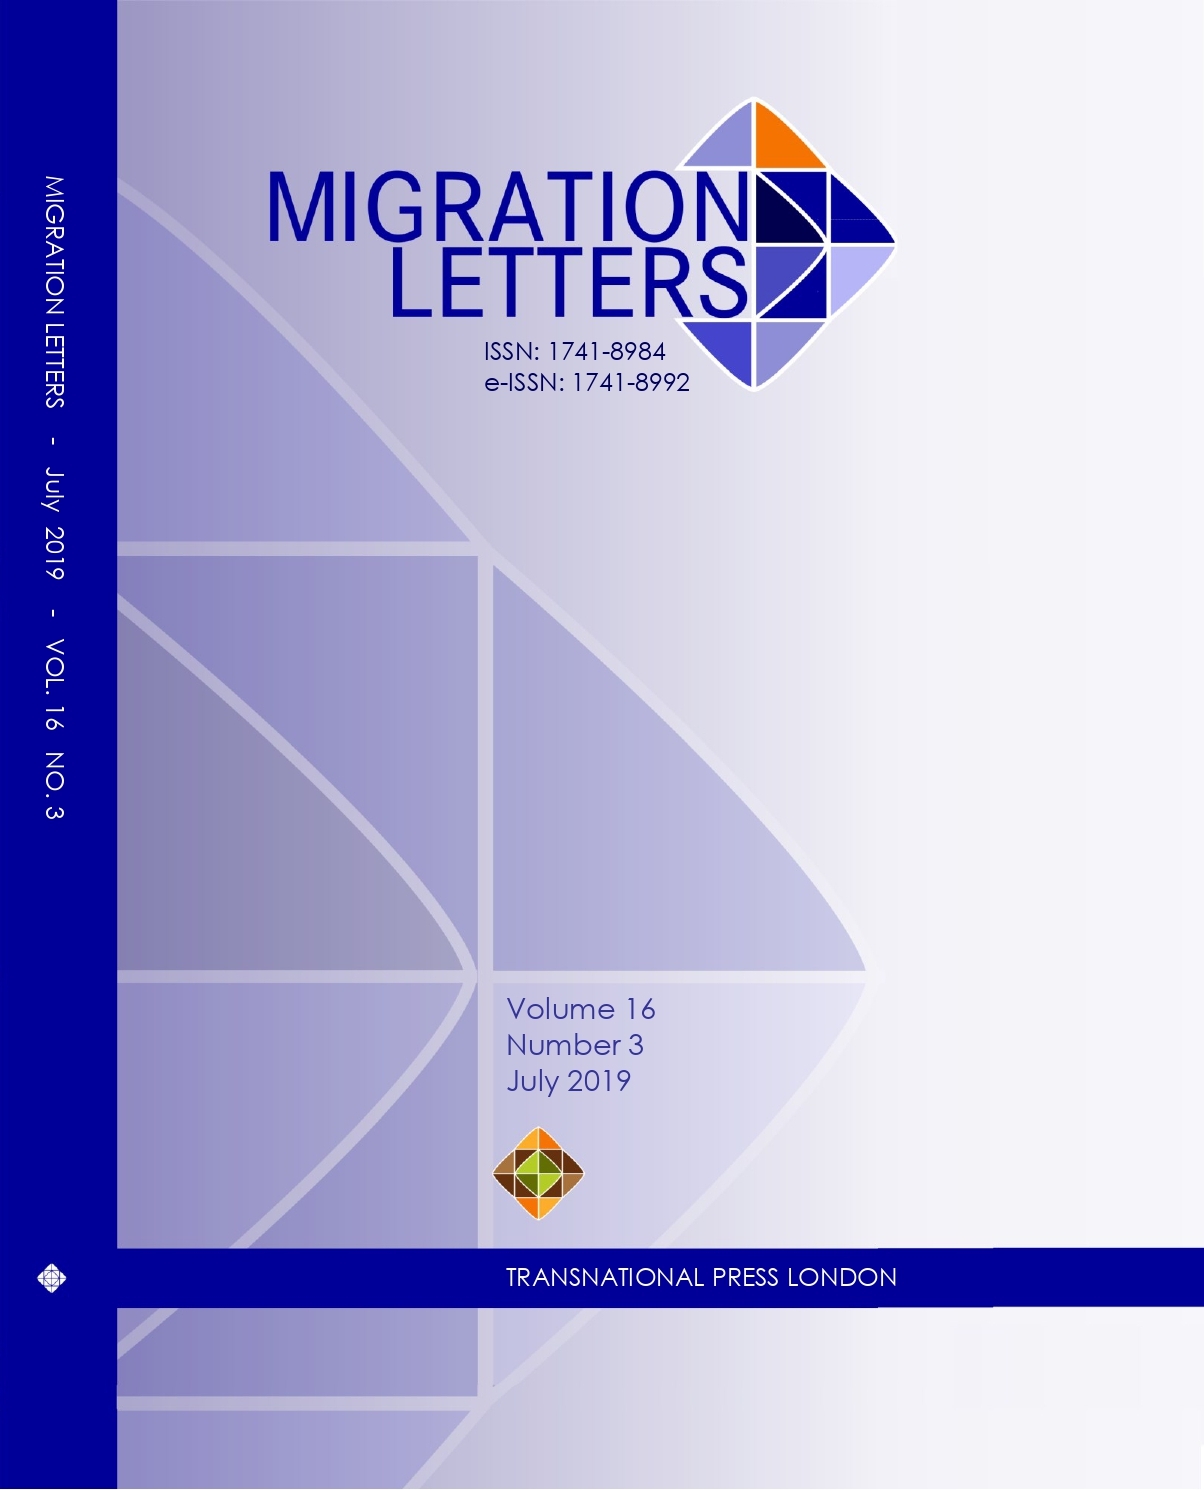 Introduction to the Special Issue: Resilience and Wellbeing in Forced Migration